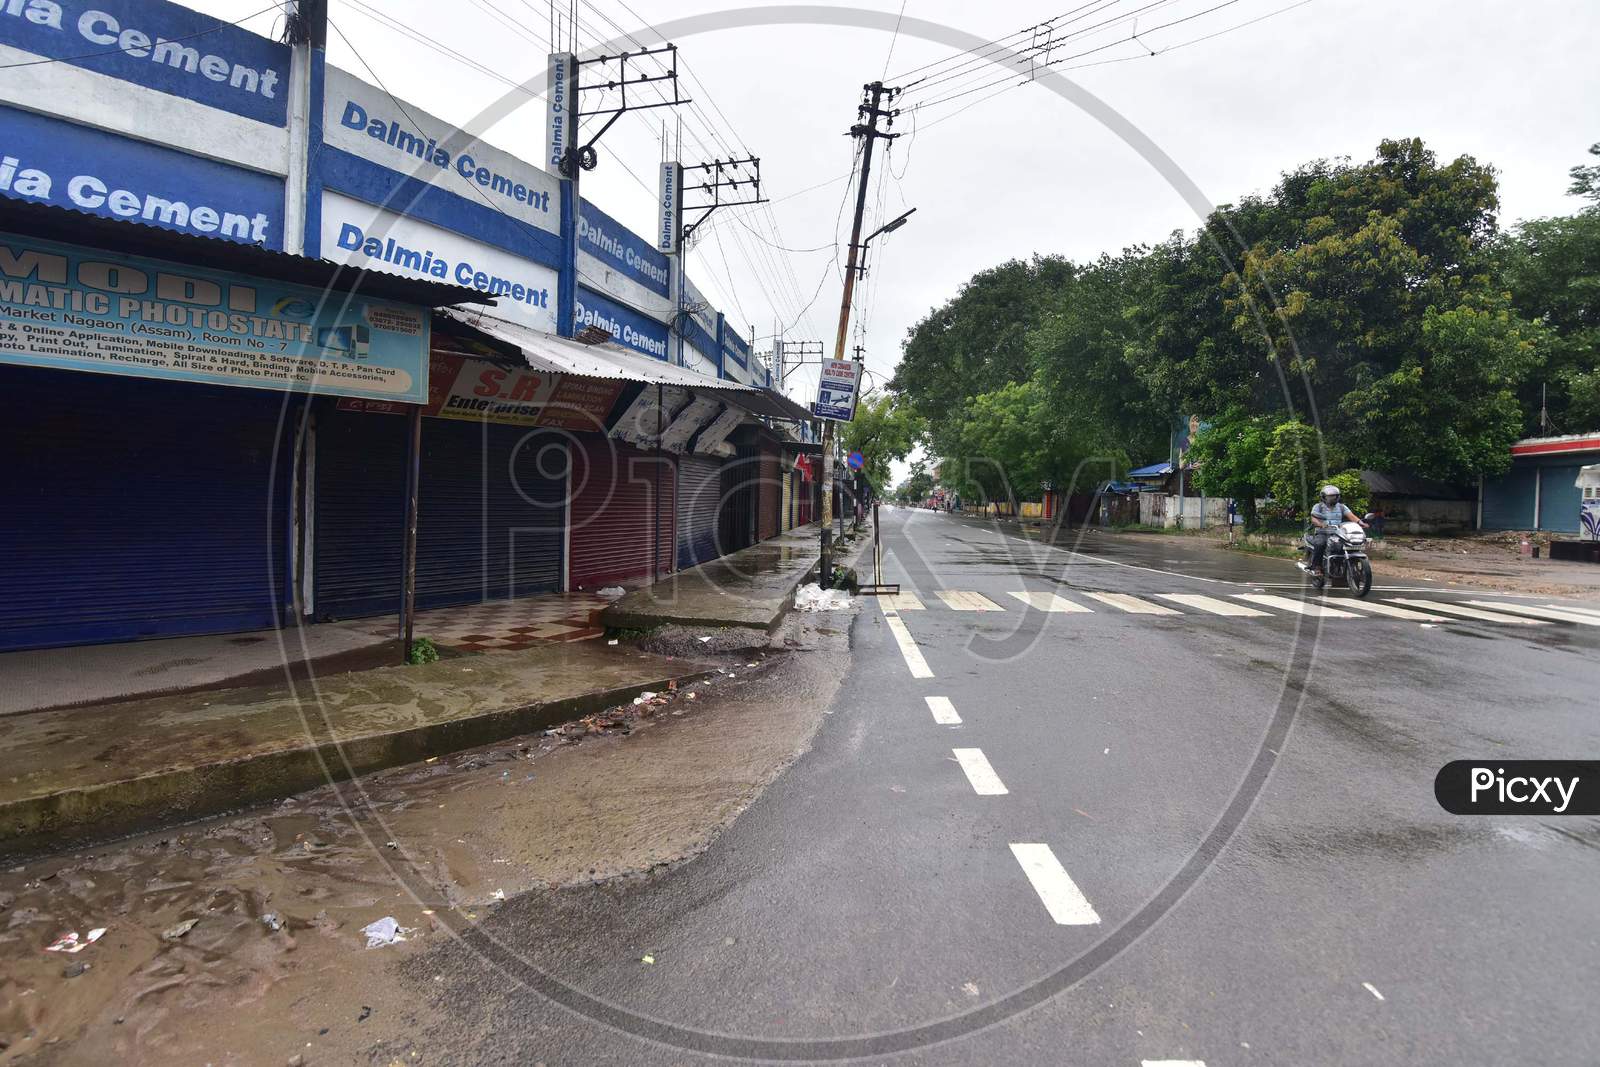 A Closed Market In Nagaon District Of Assam On Saturday, June 27, 2020. Authority Announced The Imposition Of A Weekend Lockdown In All Urban Areas Of The State.